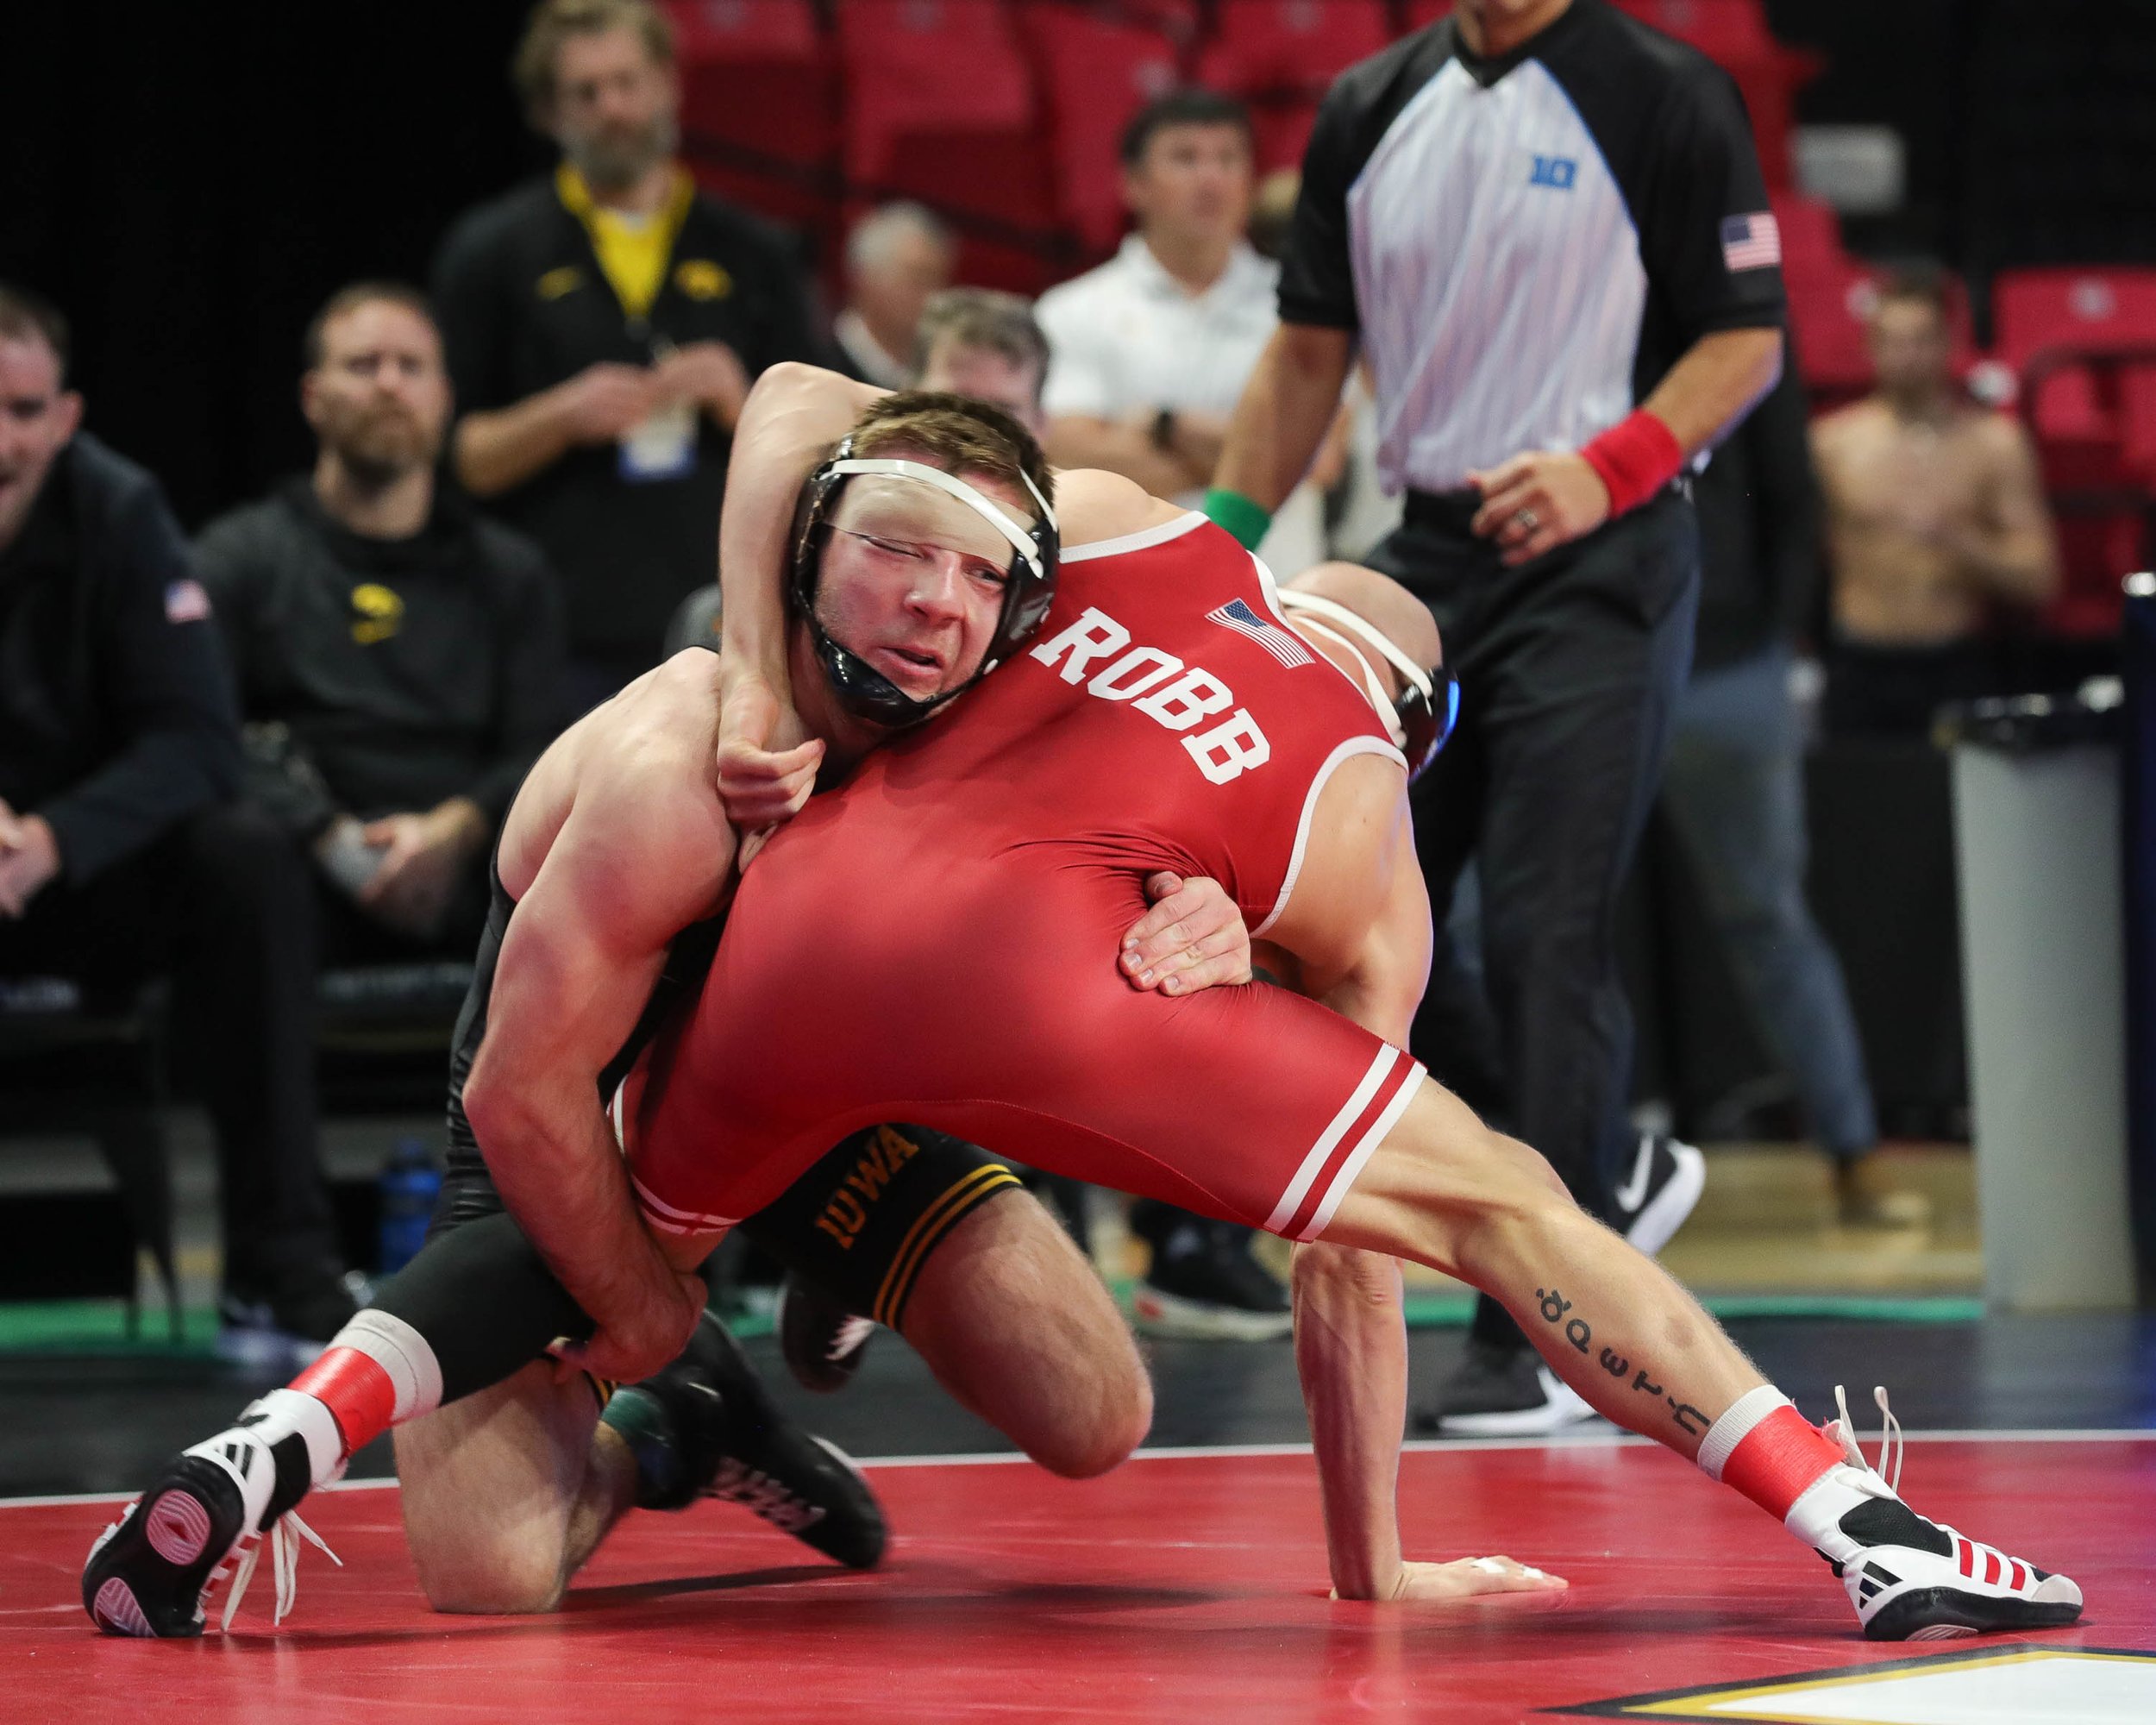  Iowa wrestler Jared Franek grapples with Nebraska’s Peyton Robb in a 157-lb quarterfinals match during the Big Ten Wrestling Championships at the Xfinity Center in College Park, Maryland on Saturday, March 9, 2023. Franek won 7-6. (David Harmantas/F